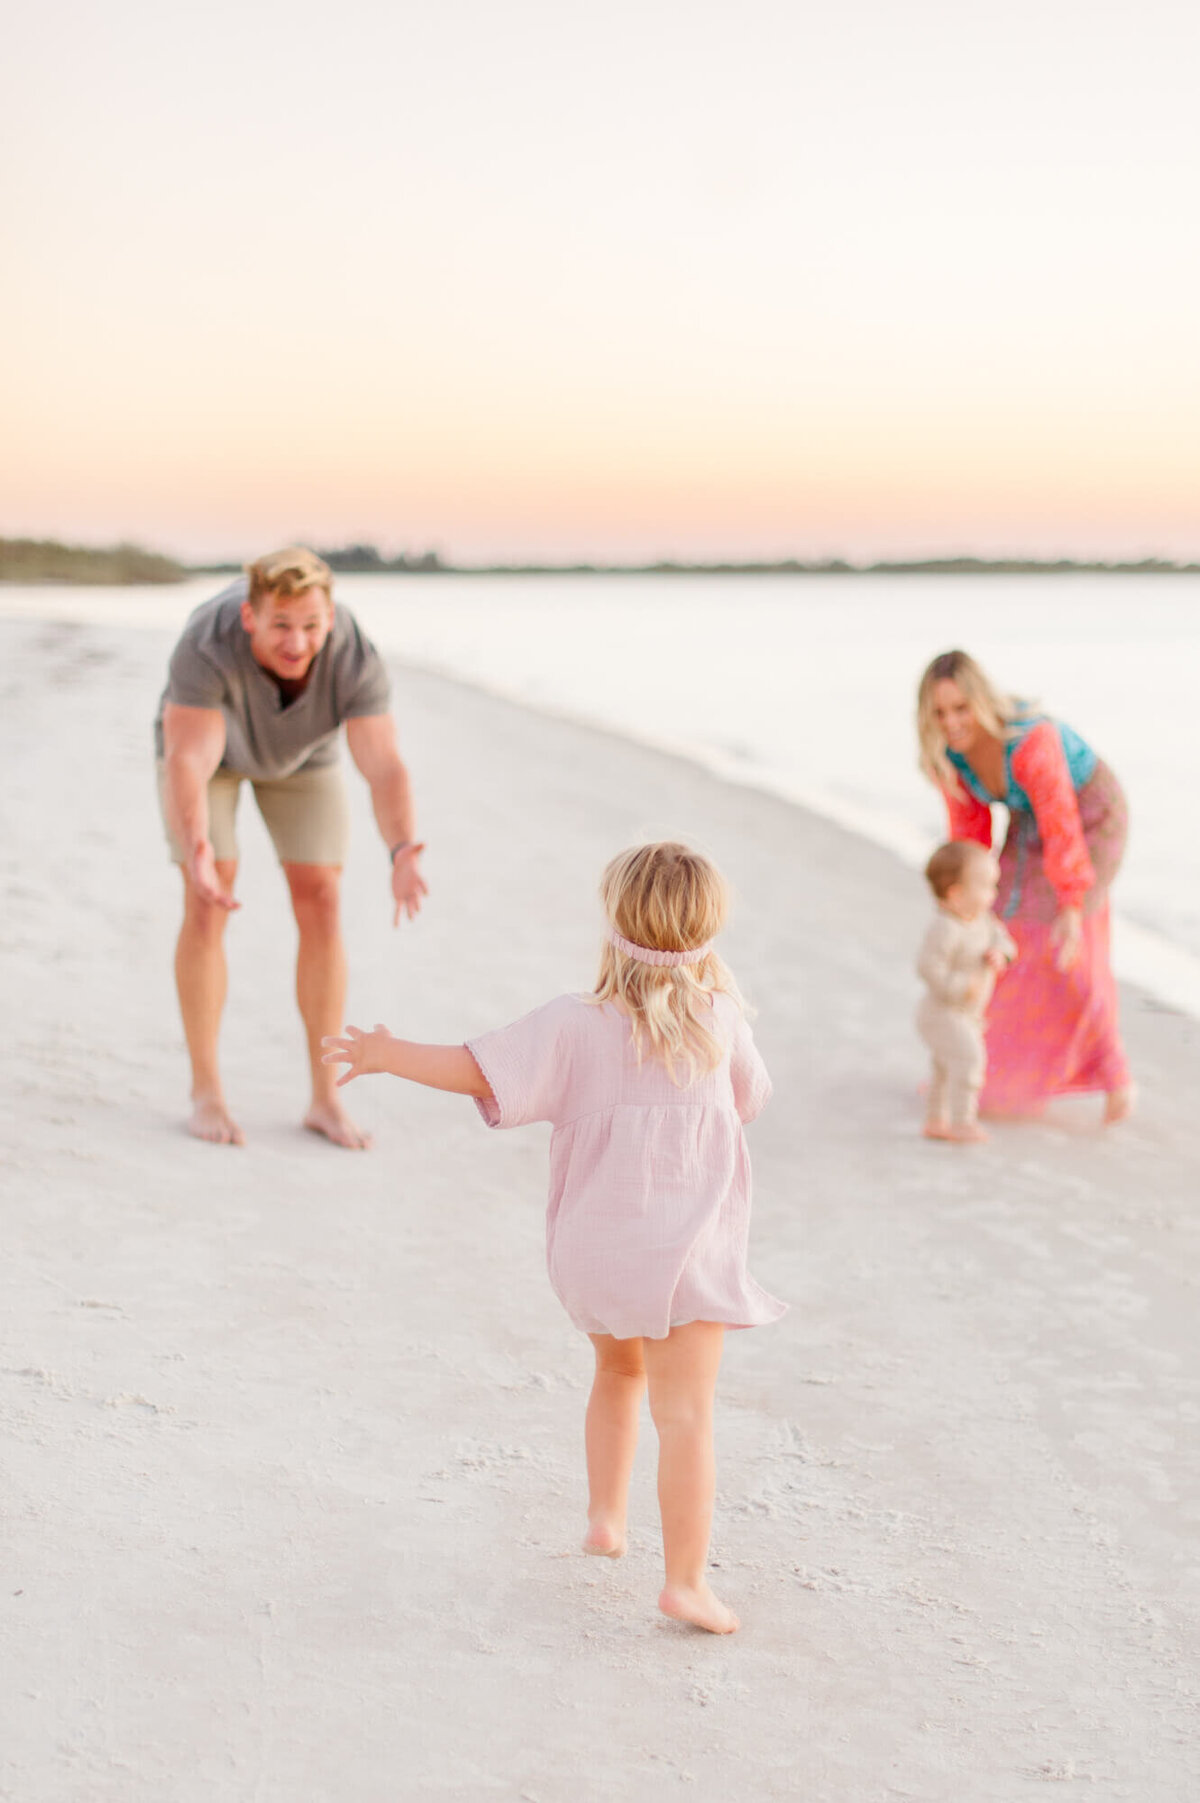 Action photo of a family playing with each other near the shoreline at sunset